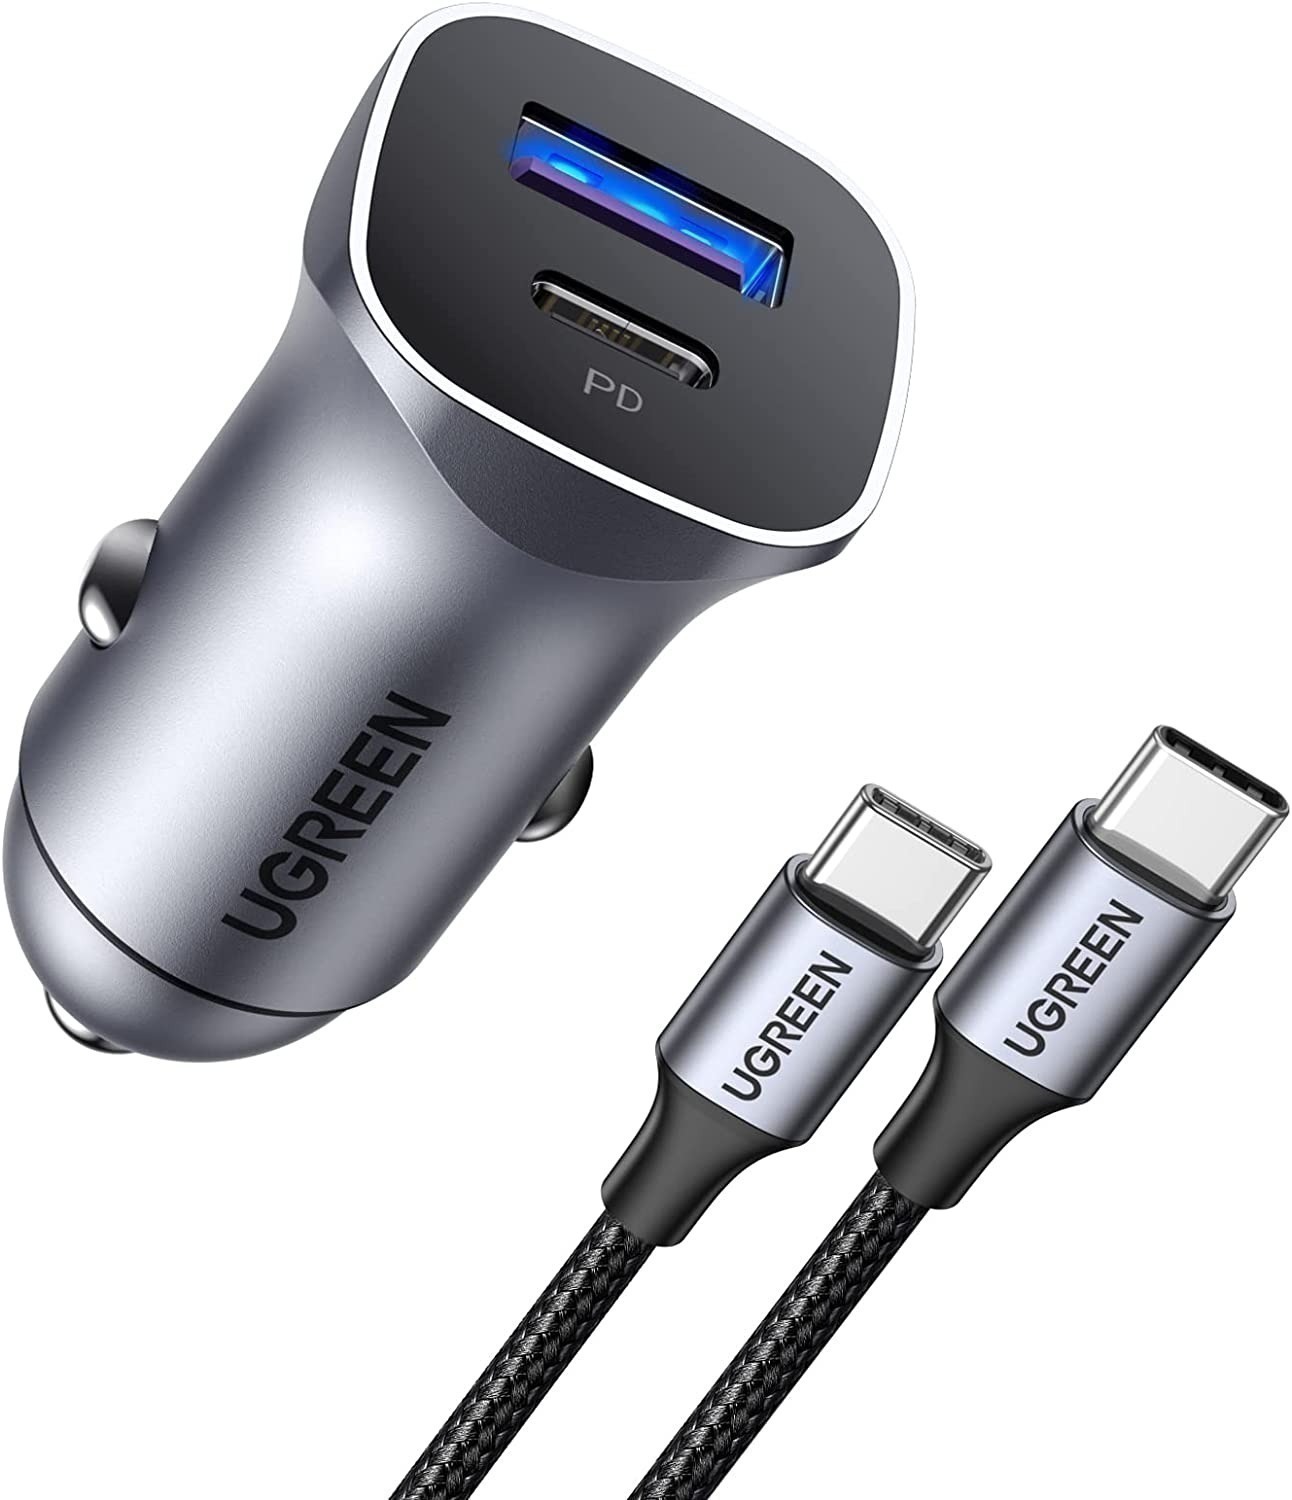 UGREEN 30W 2-Port (USB-A & USB-C) Fast Charging Car Charger w/ 3' 60W USB-C Cable $11.51 + Free Shipping w/ Prime or on Orders $25+